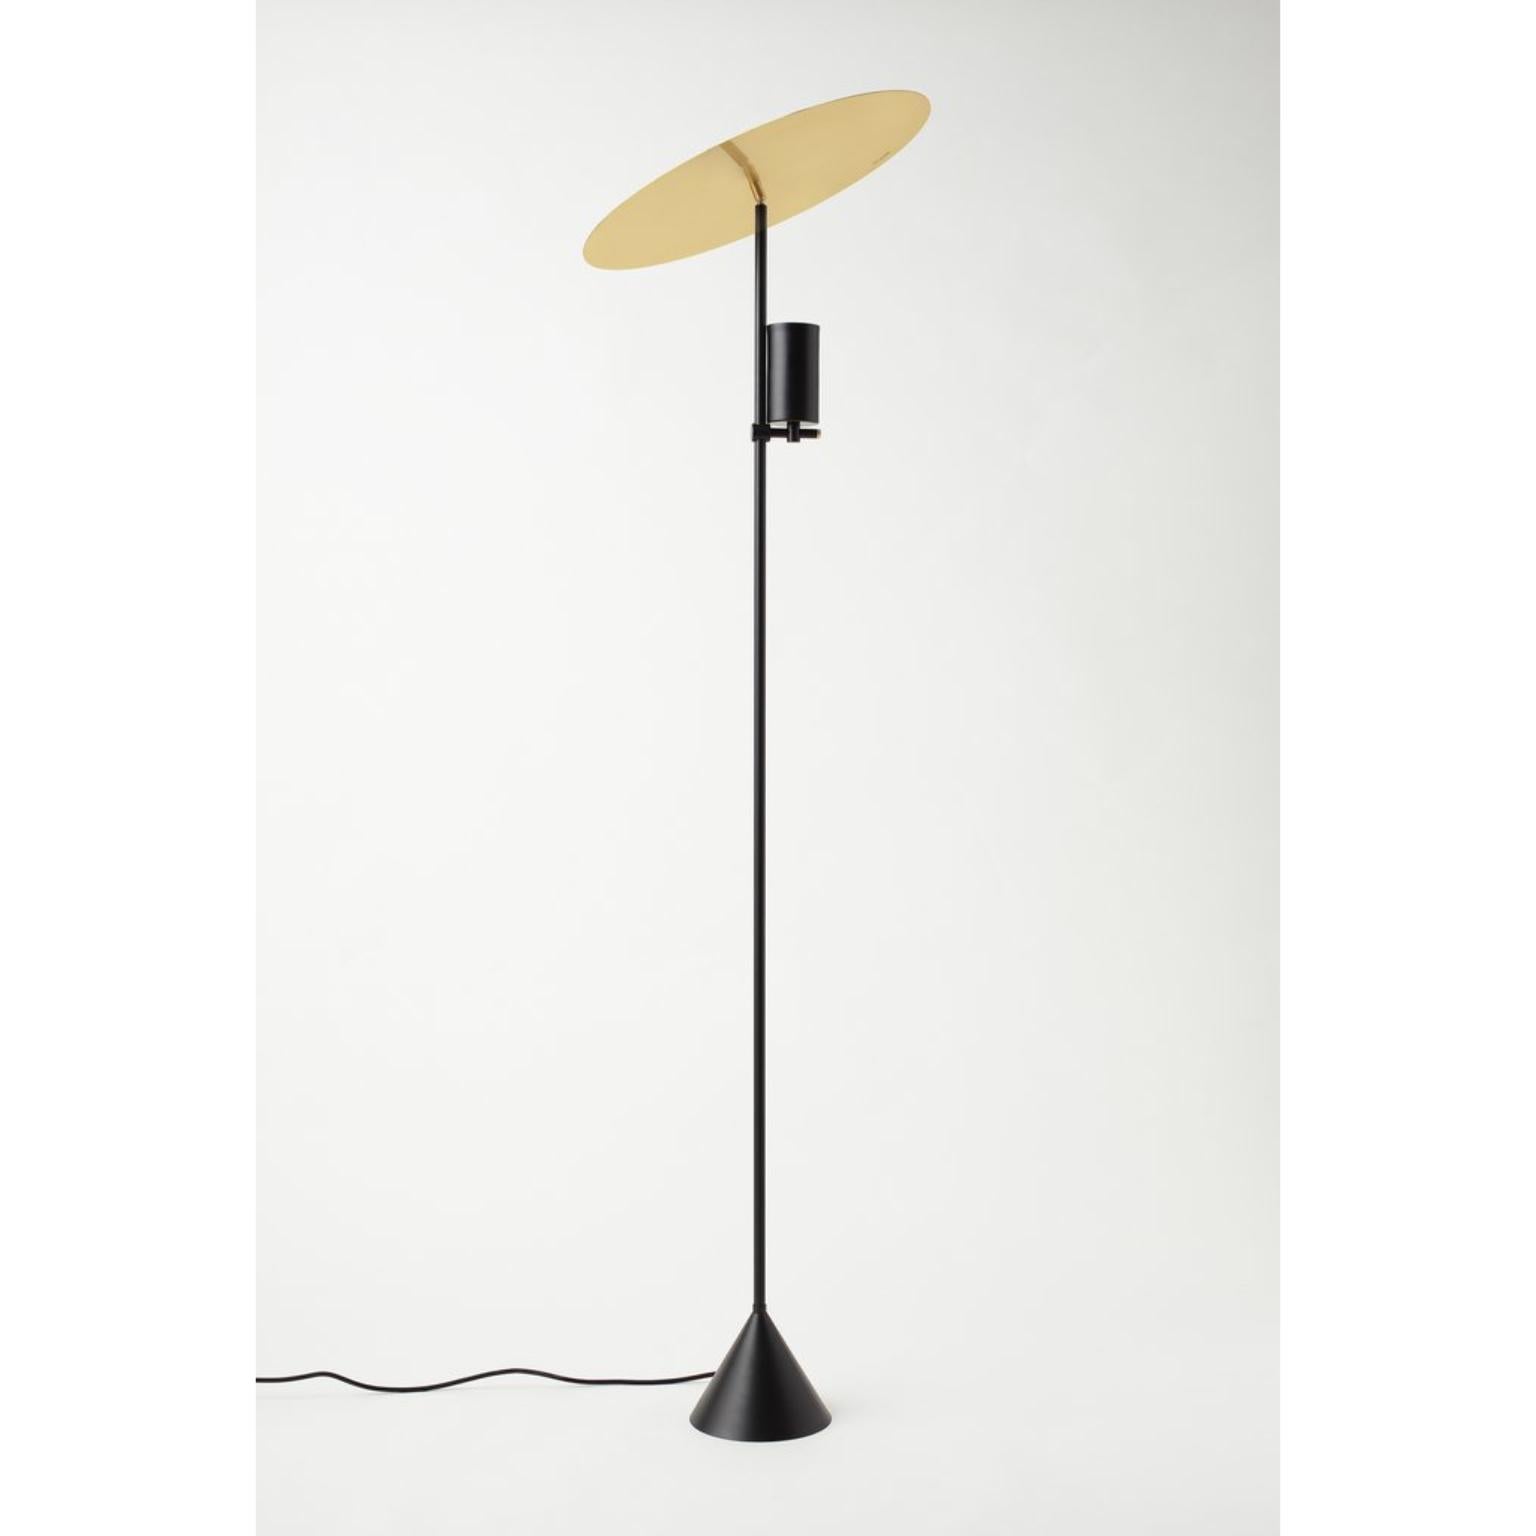 Unique Sol floor lamp by Hatsu
Dimensions: W 50 x H 181.5 cm 
Materials: Powdercoated aluminium, brass fabric cord

Hatsu is a design studio based in Mumbai that creates modern lighting that are unique and immediately recognisable. We started with